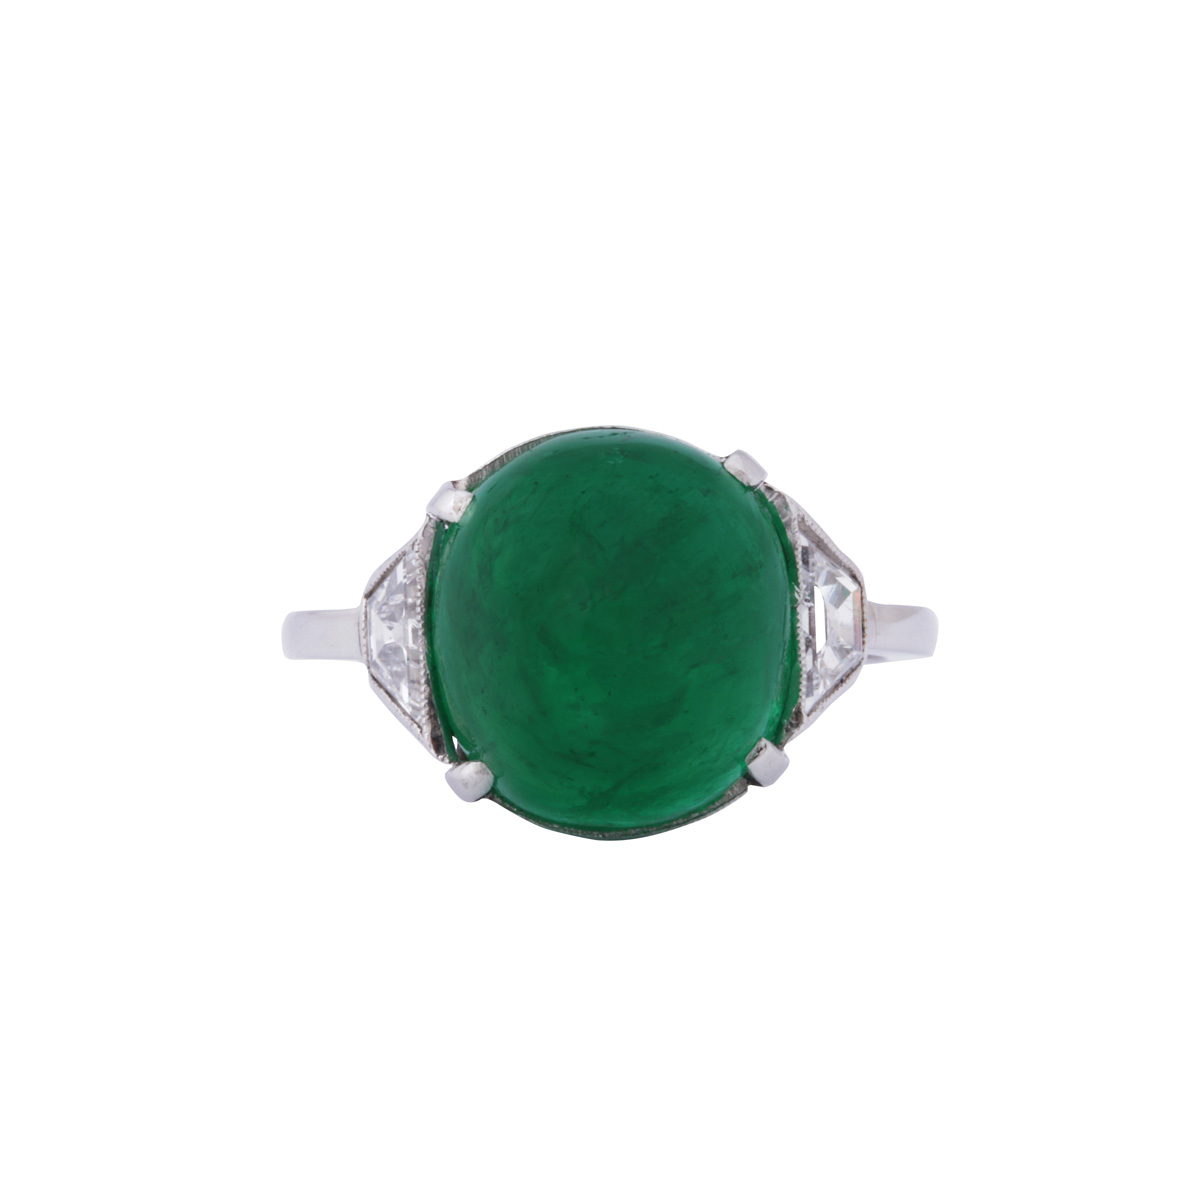 Edwardian Emerald and Diamond Ring – A La Vieille Russie FABERGE ...